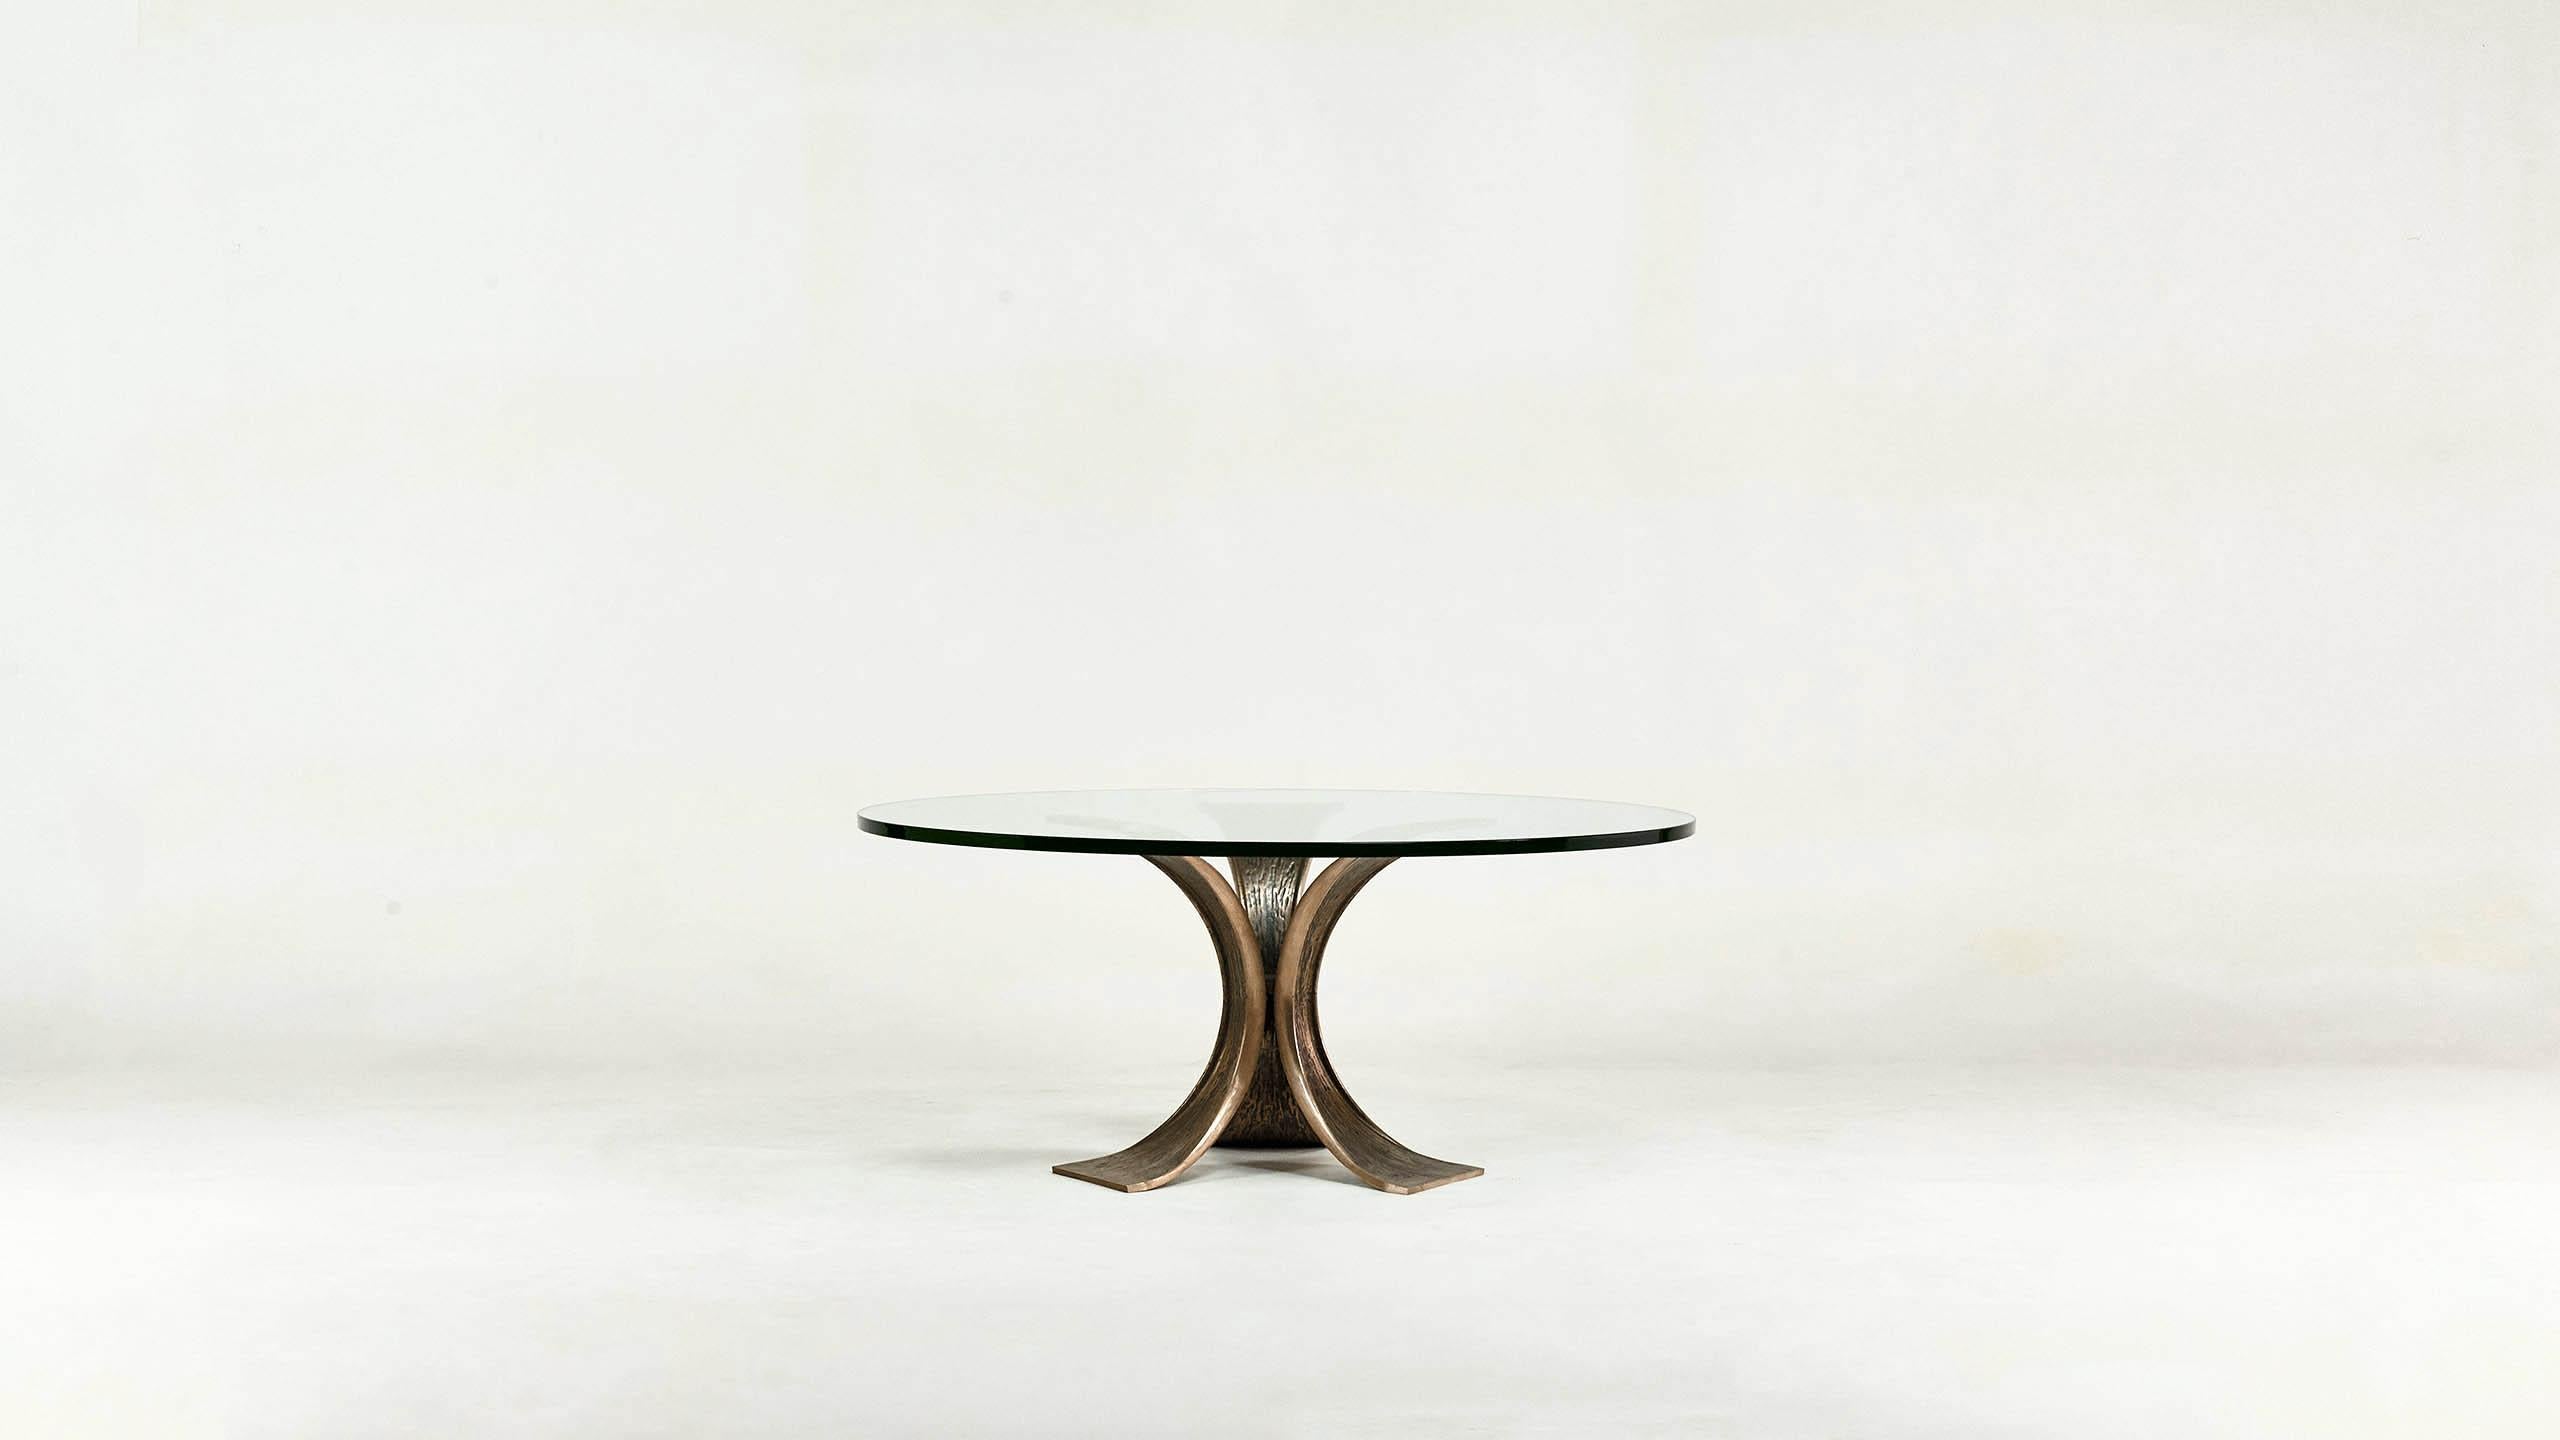 German Brutalist Coffee Table, Casted Bronze and Glass, circa 1970